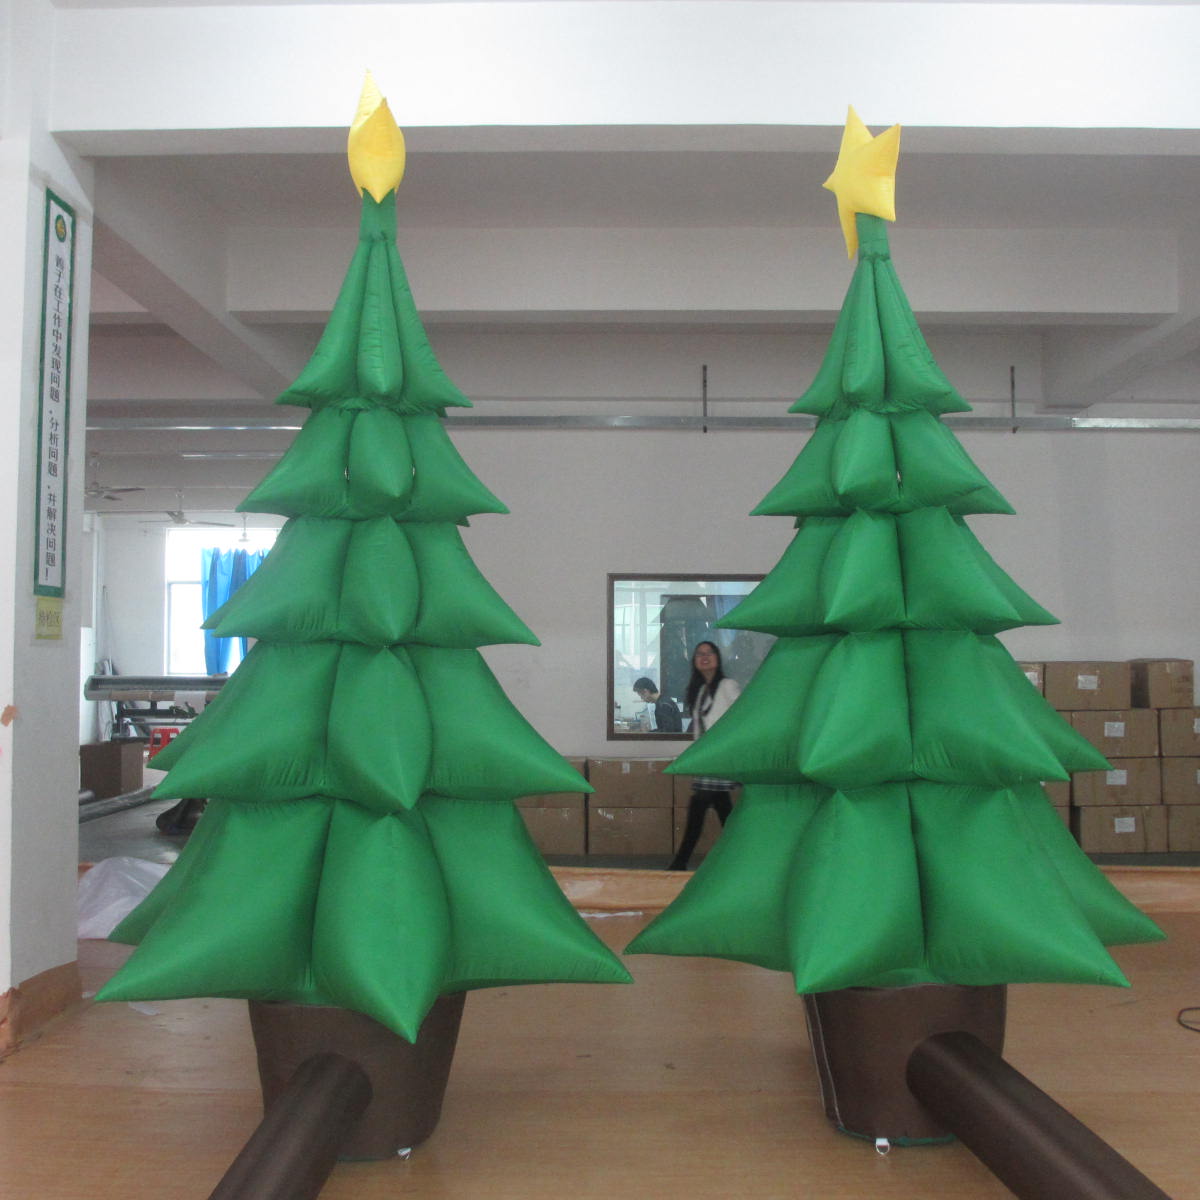 Customised 3M Christams Tree Blow Up Indoor Outdoor Garden Xmas Decor Holiday